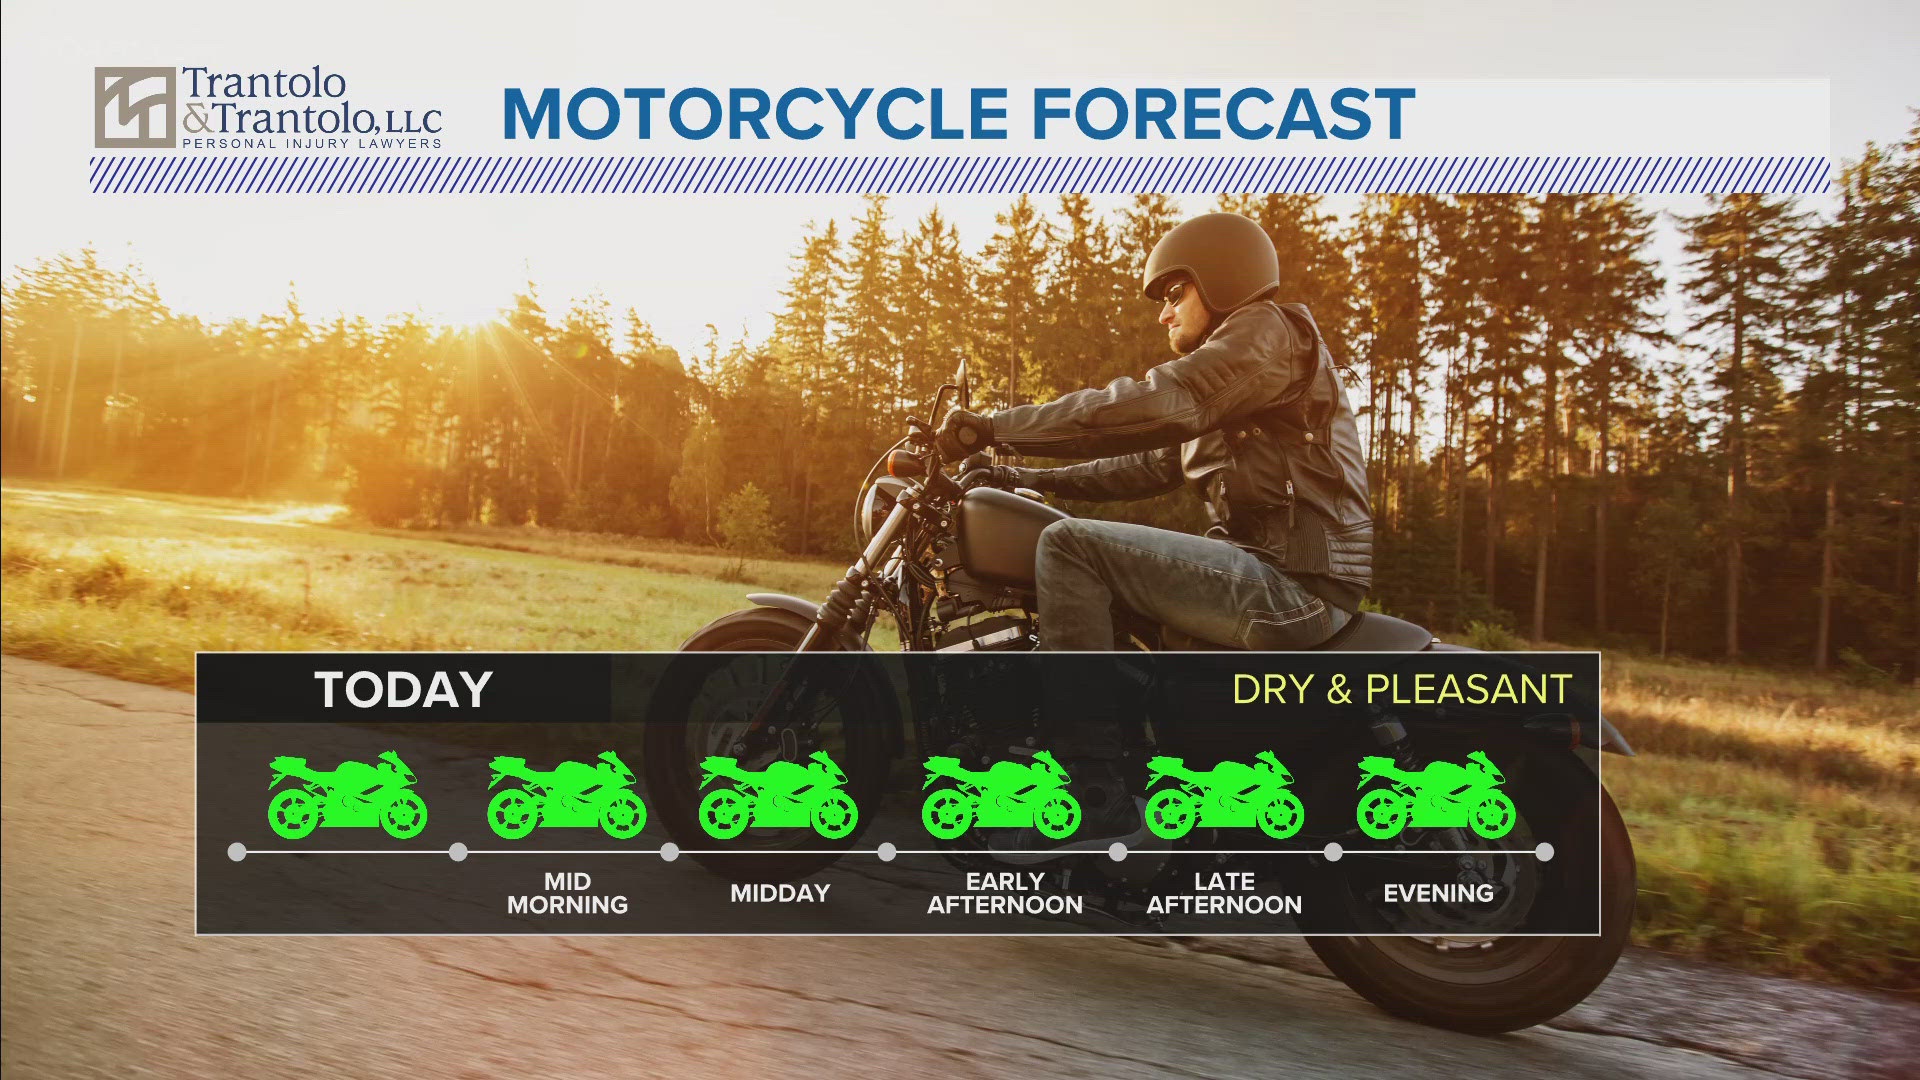 FOX61 Meteorologist Sam Sampieri gives an update on Connecticut's motorcycle forecast for today.